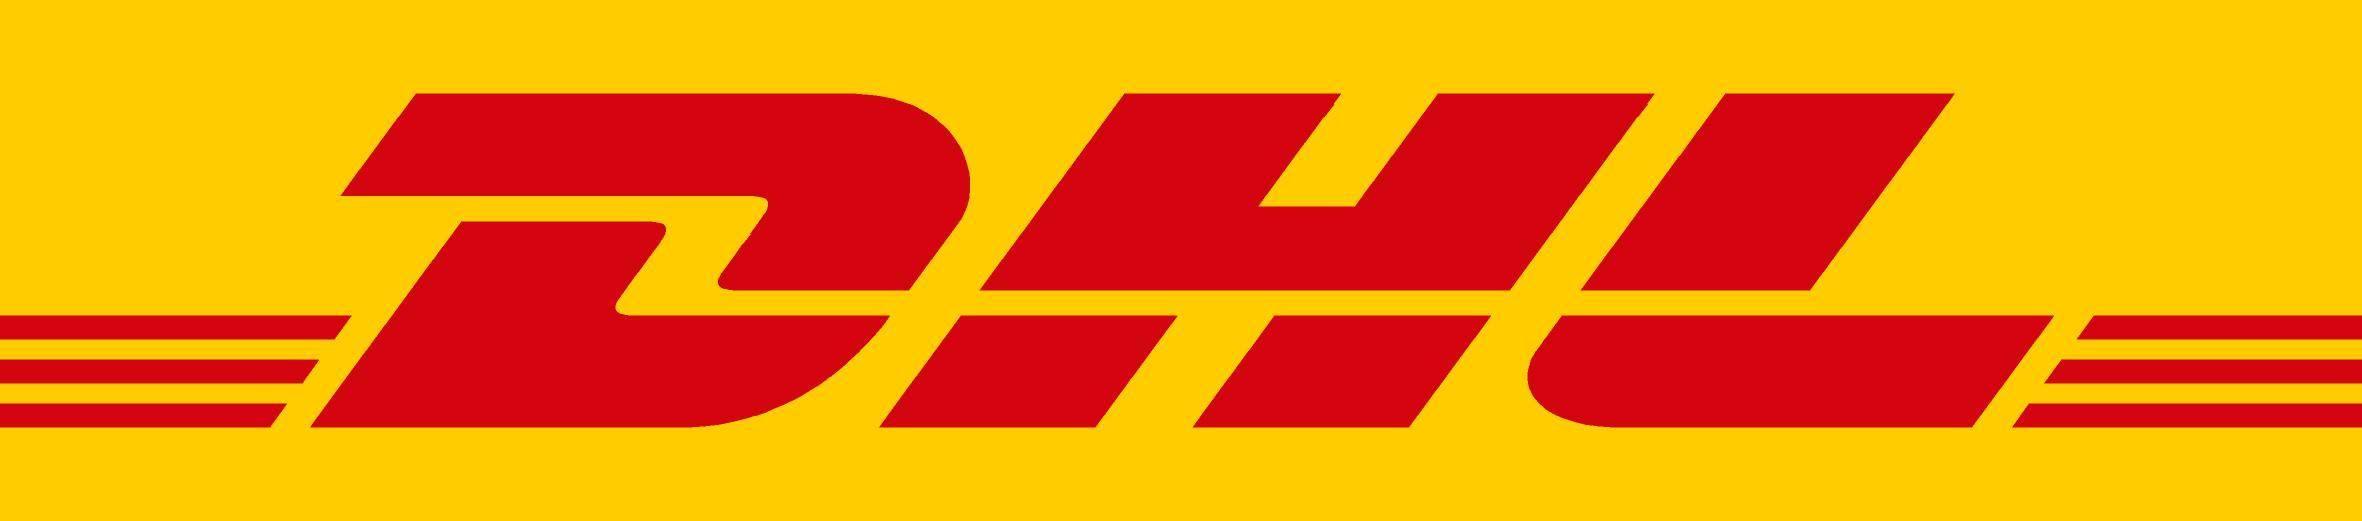 DHL Worldwide Express Logo - Open Pricer – DHL Express Successfully Implements Open Pricer ...